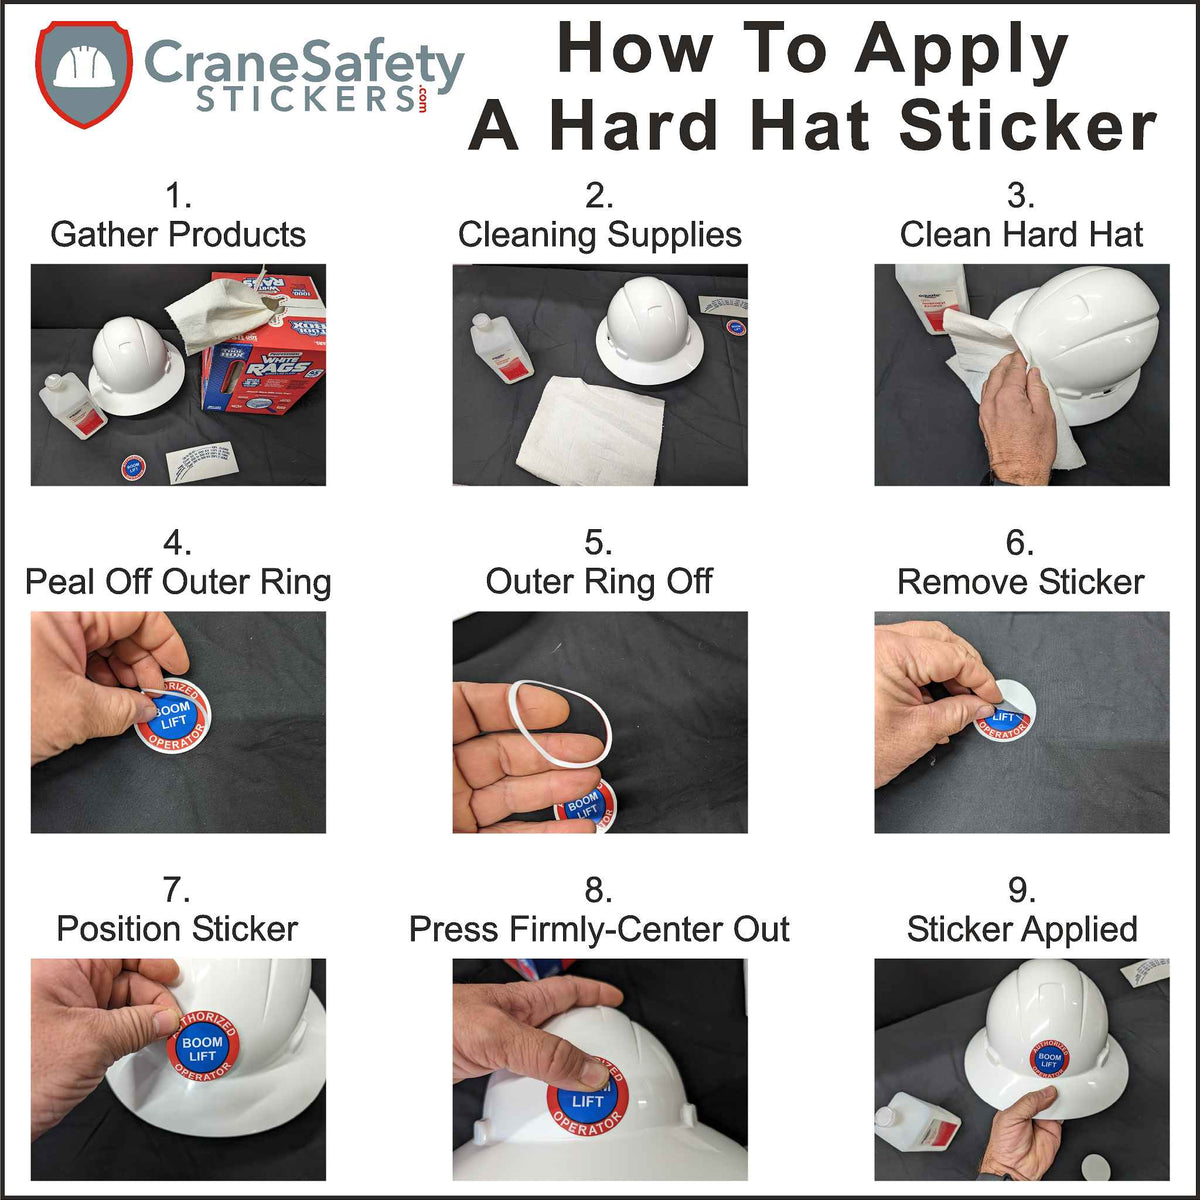 Directions on how to apply a certified crane operator sticker to a hard hat.